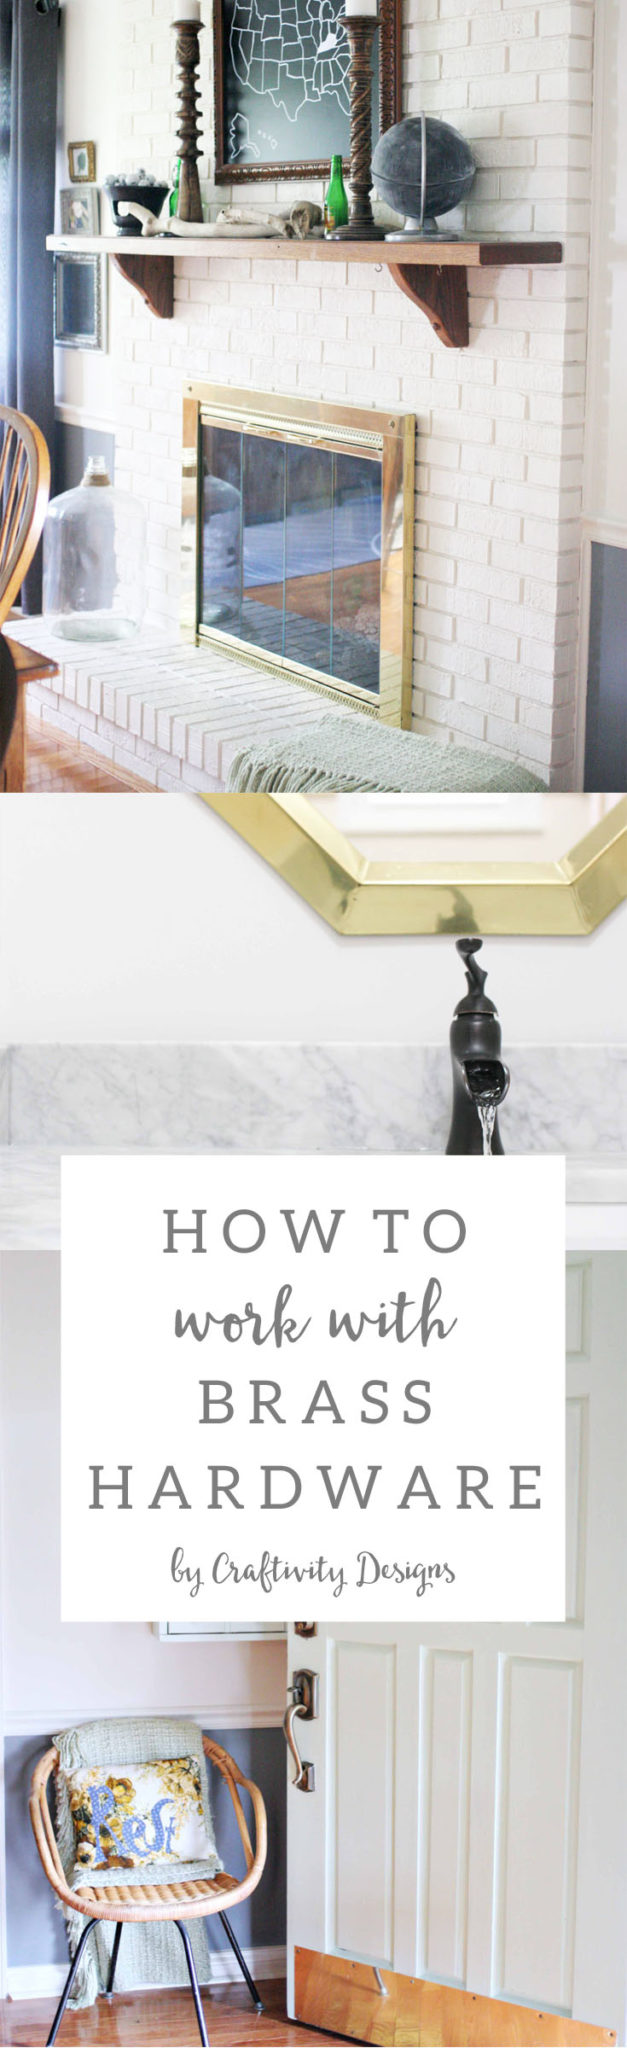 How to Work with Brass Hardware // Mixing Brass with other metal finishes. // @CraftivityD